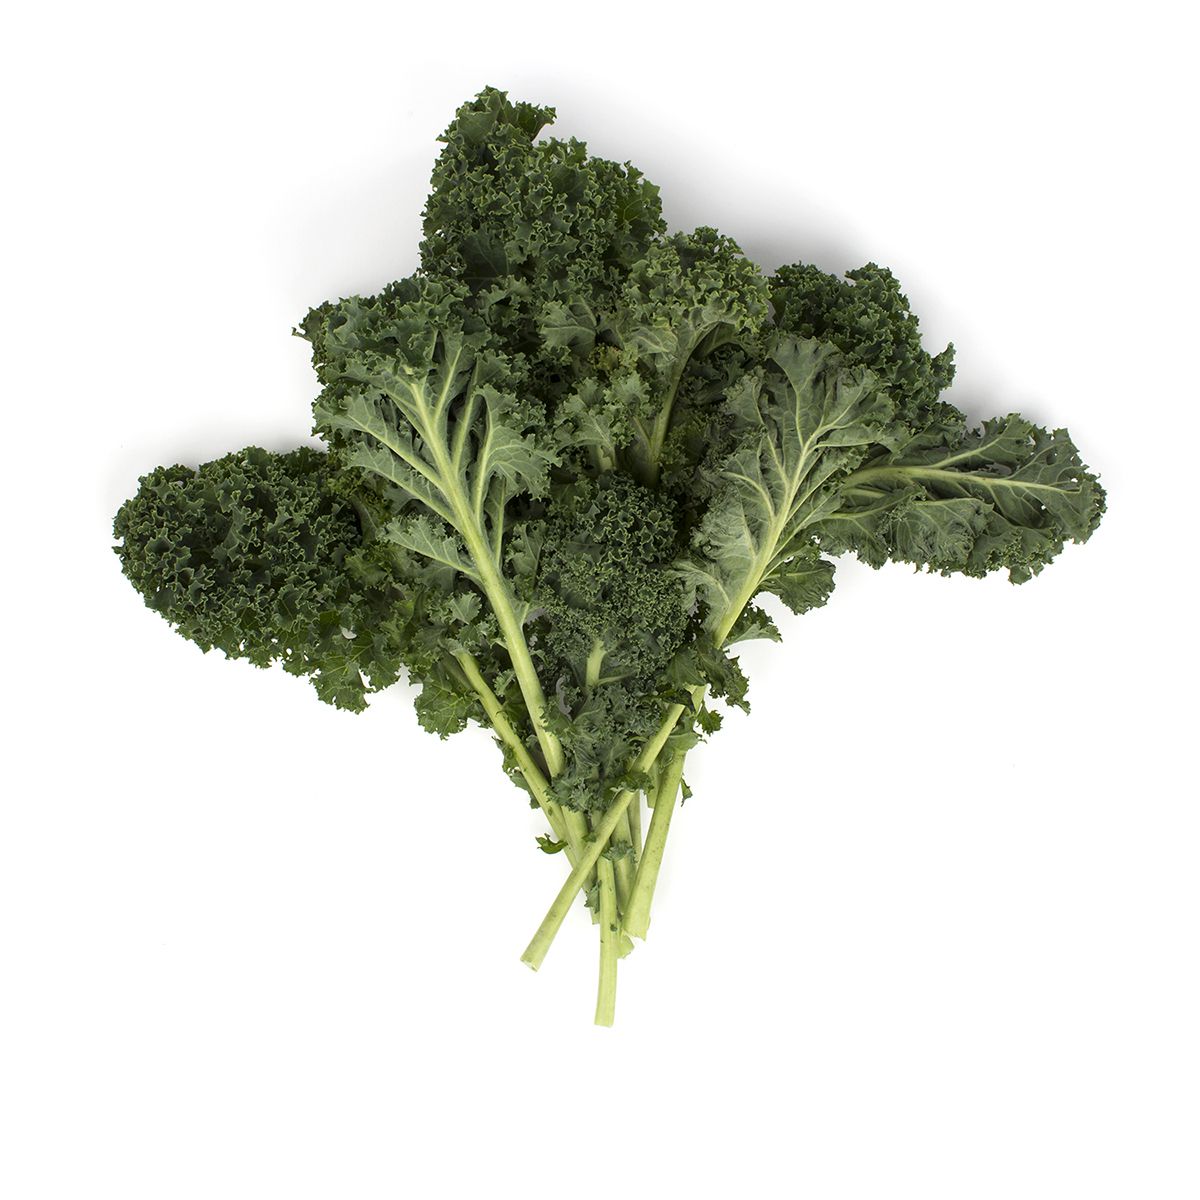 BoxNCase Local Green Kale 12 Ct Pack